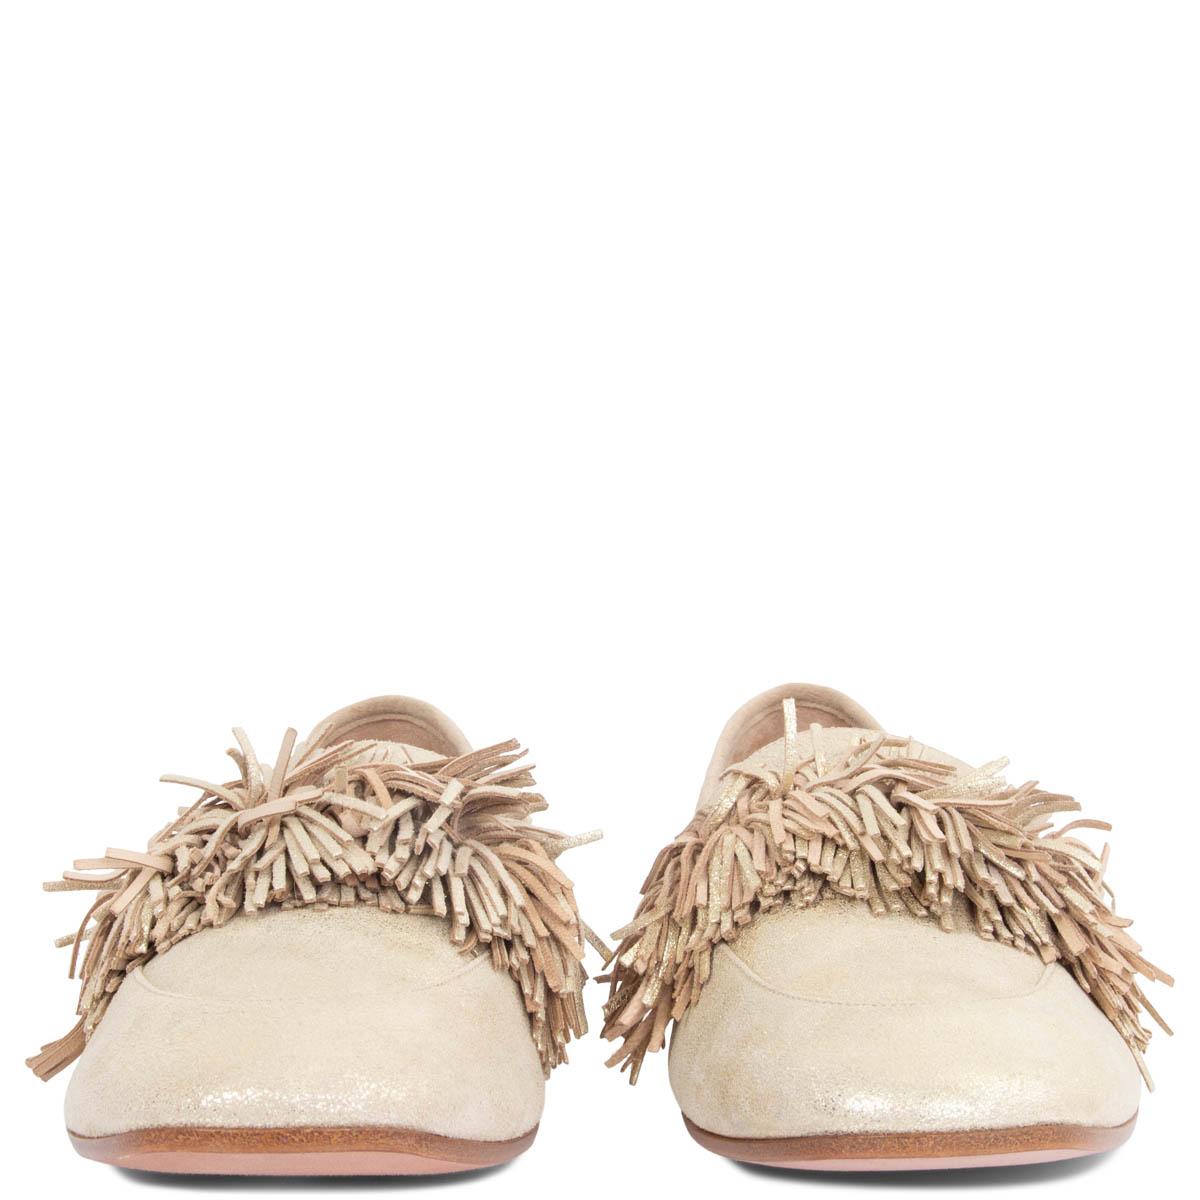 100% authentic Aquazzura Wild Thing fringe loafers in metallic gold and beige suede calfskin. Brand new. Come with dust bag. 

Measurements
Imprinted Size	40 (run 1 size smaller)
Shoe Size	39
Inside Sole	26cm (10.1in)
Width	8cm (3.1in)

All our